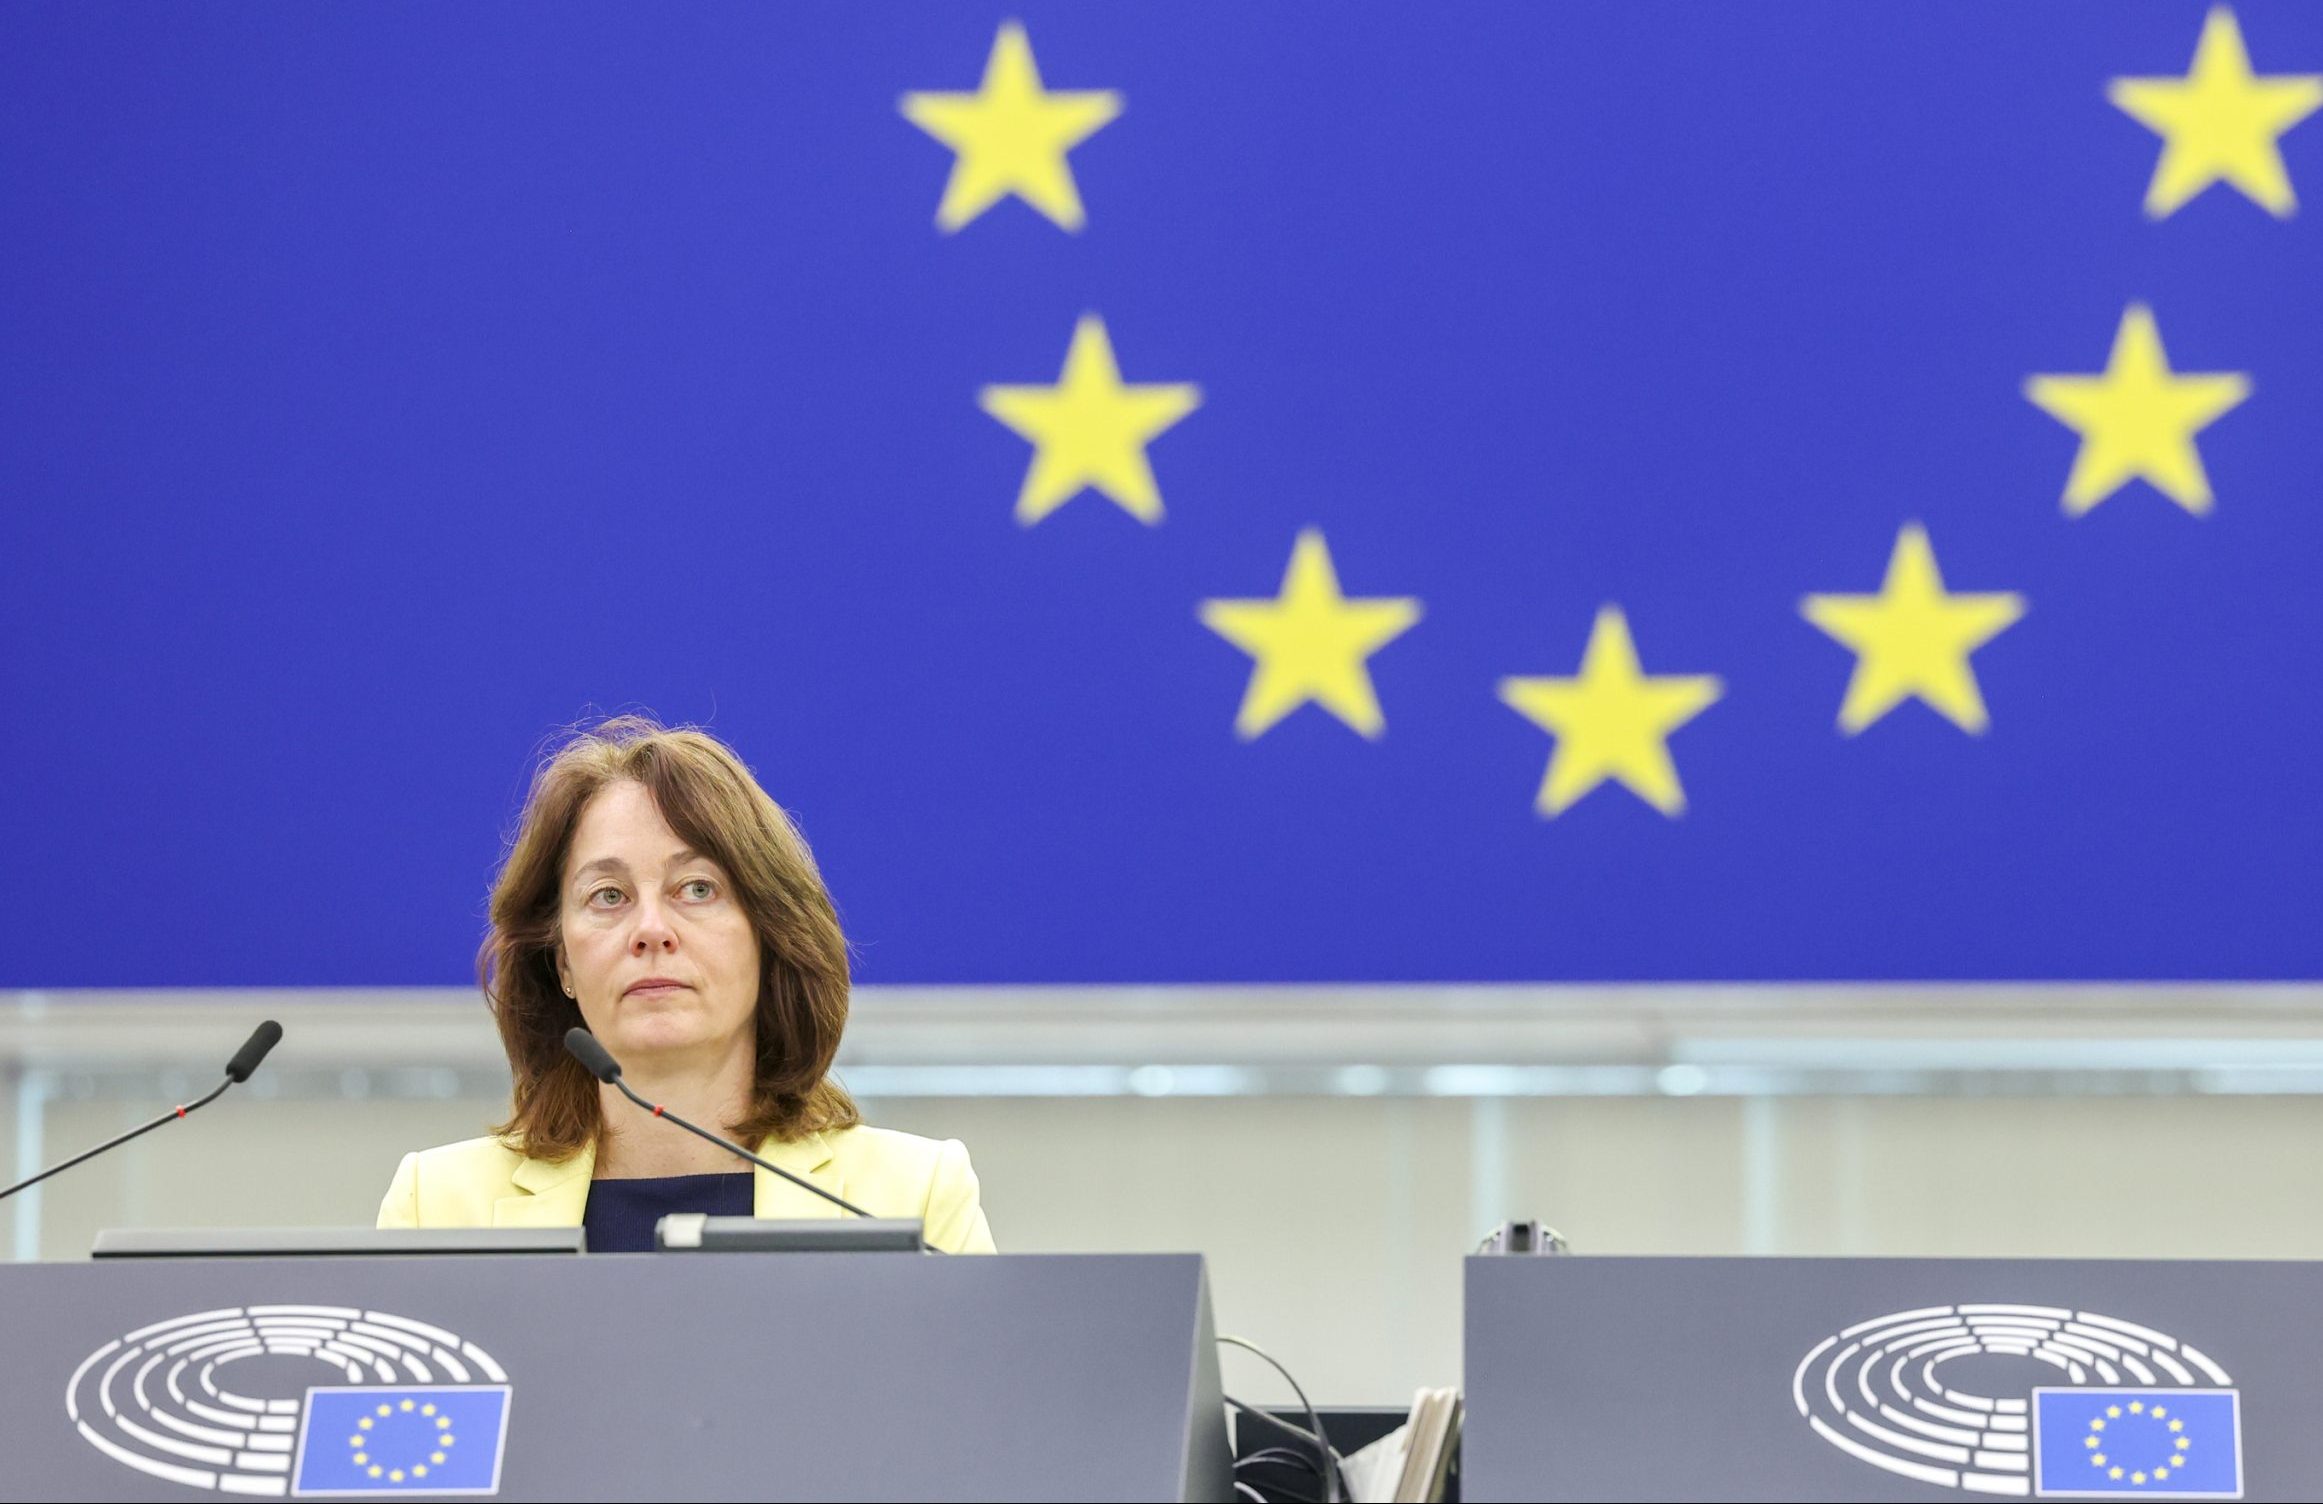 Fidesz MEP Calls for Katarina Barley's Removal from Office